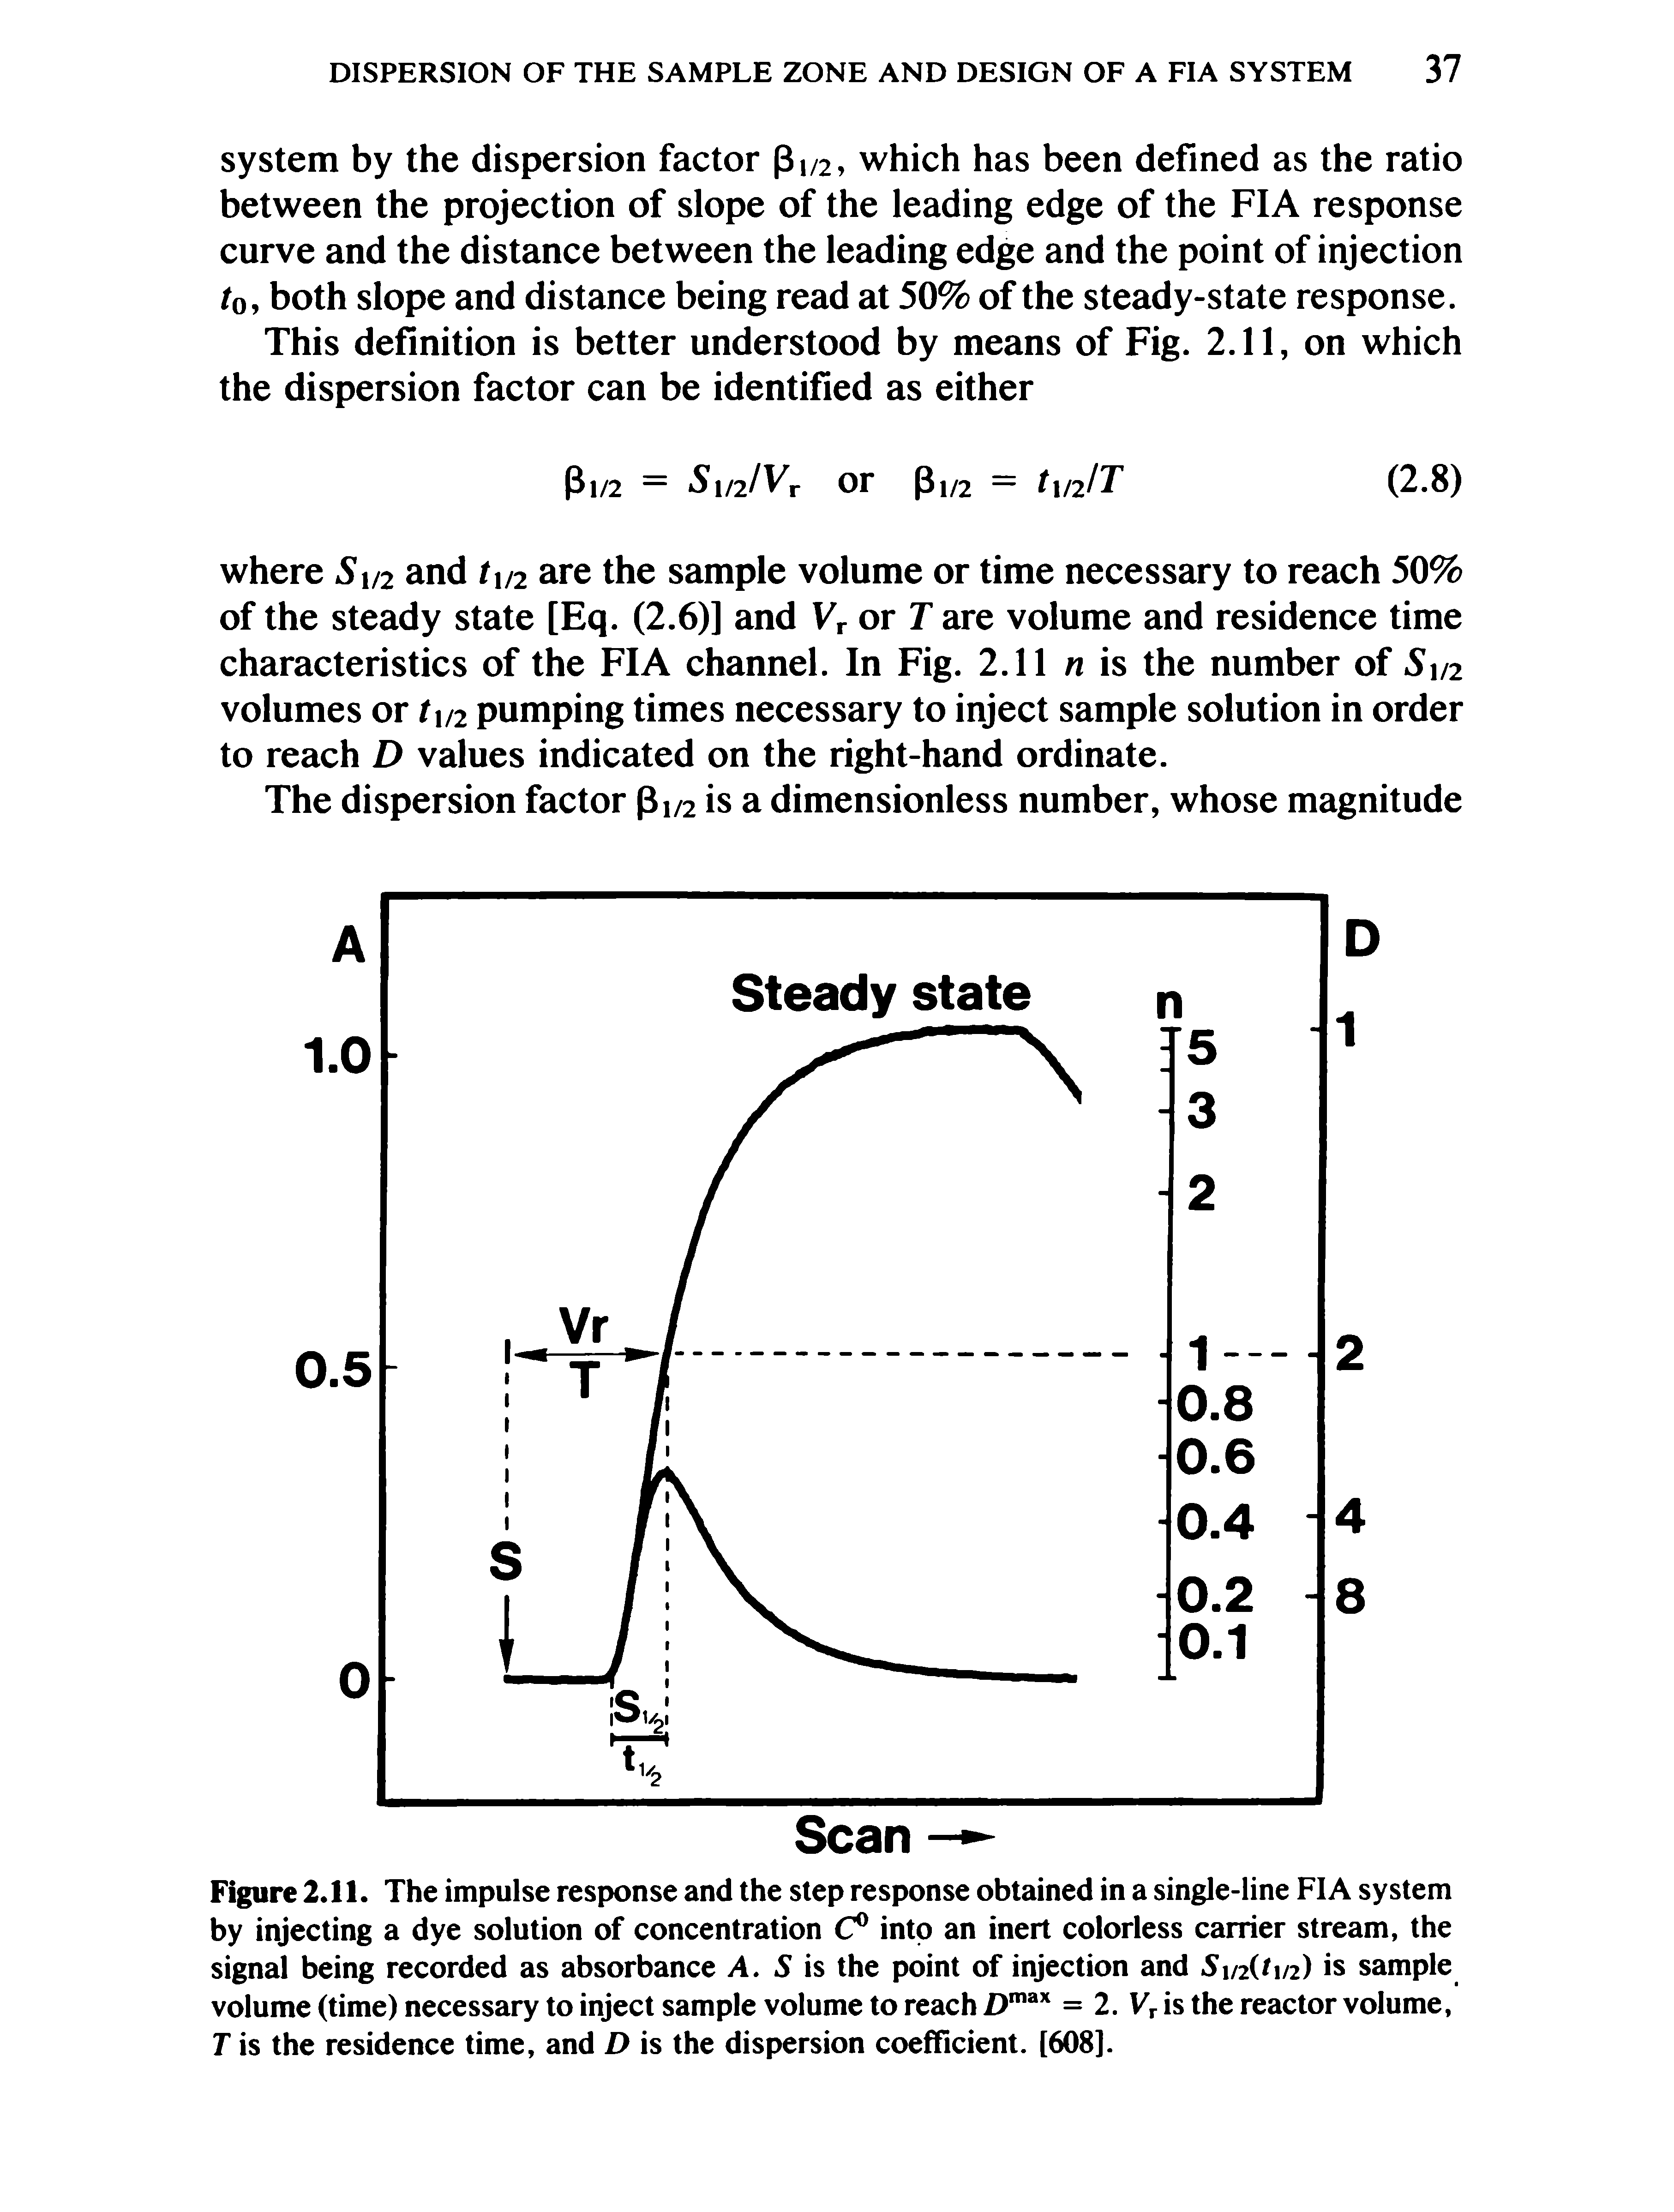 Figure 2.11. The impulse response and the step response obtained in a single-line FIA system by injecting a dye solution of concentration C into an inert colorless carrier stream, the signal being recorded as absorbance A. 5 is the point of injection and 5i/2(ti/2) is sample volume (time) necessary to inject sample volume to reach = 2. Vr is the reactor volume, T is the residence time, and D is the dispersion coefficient. [608].